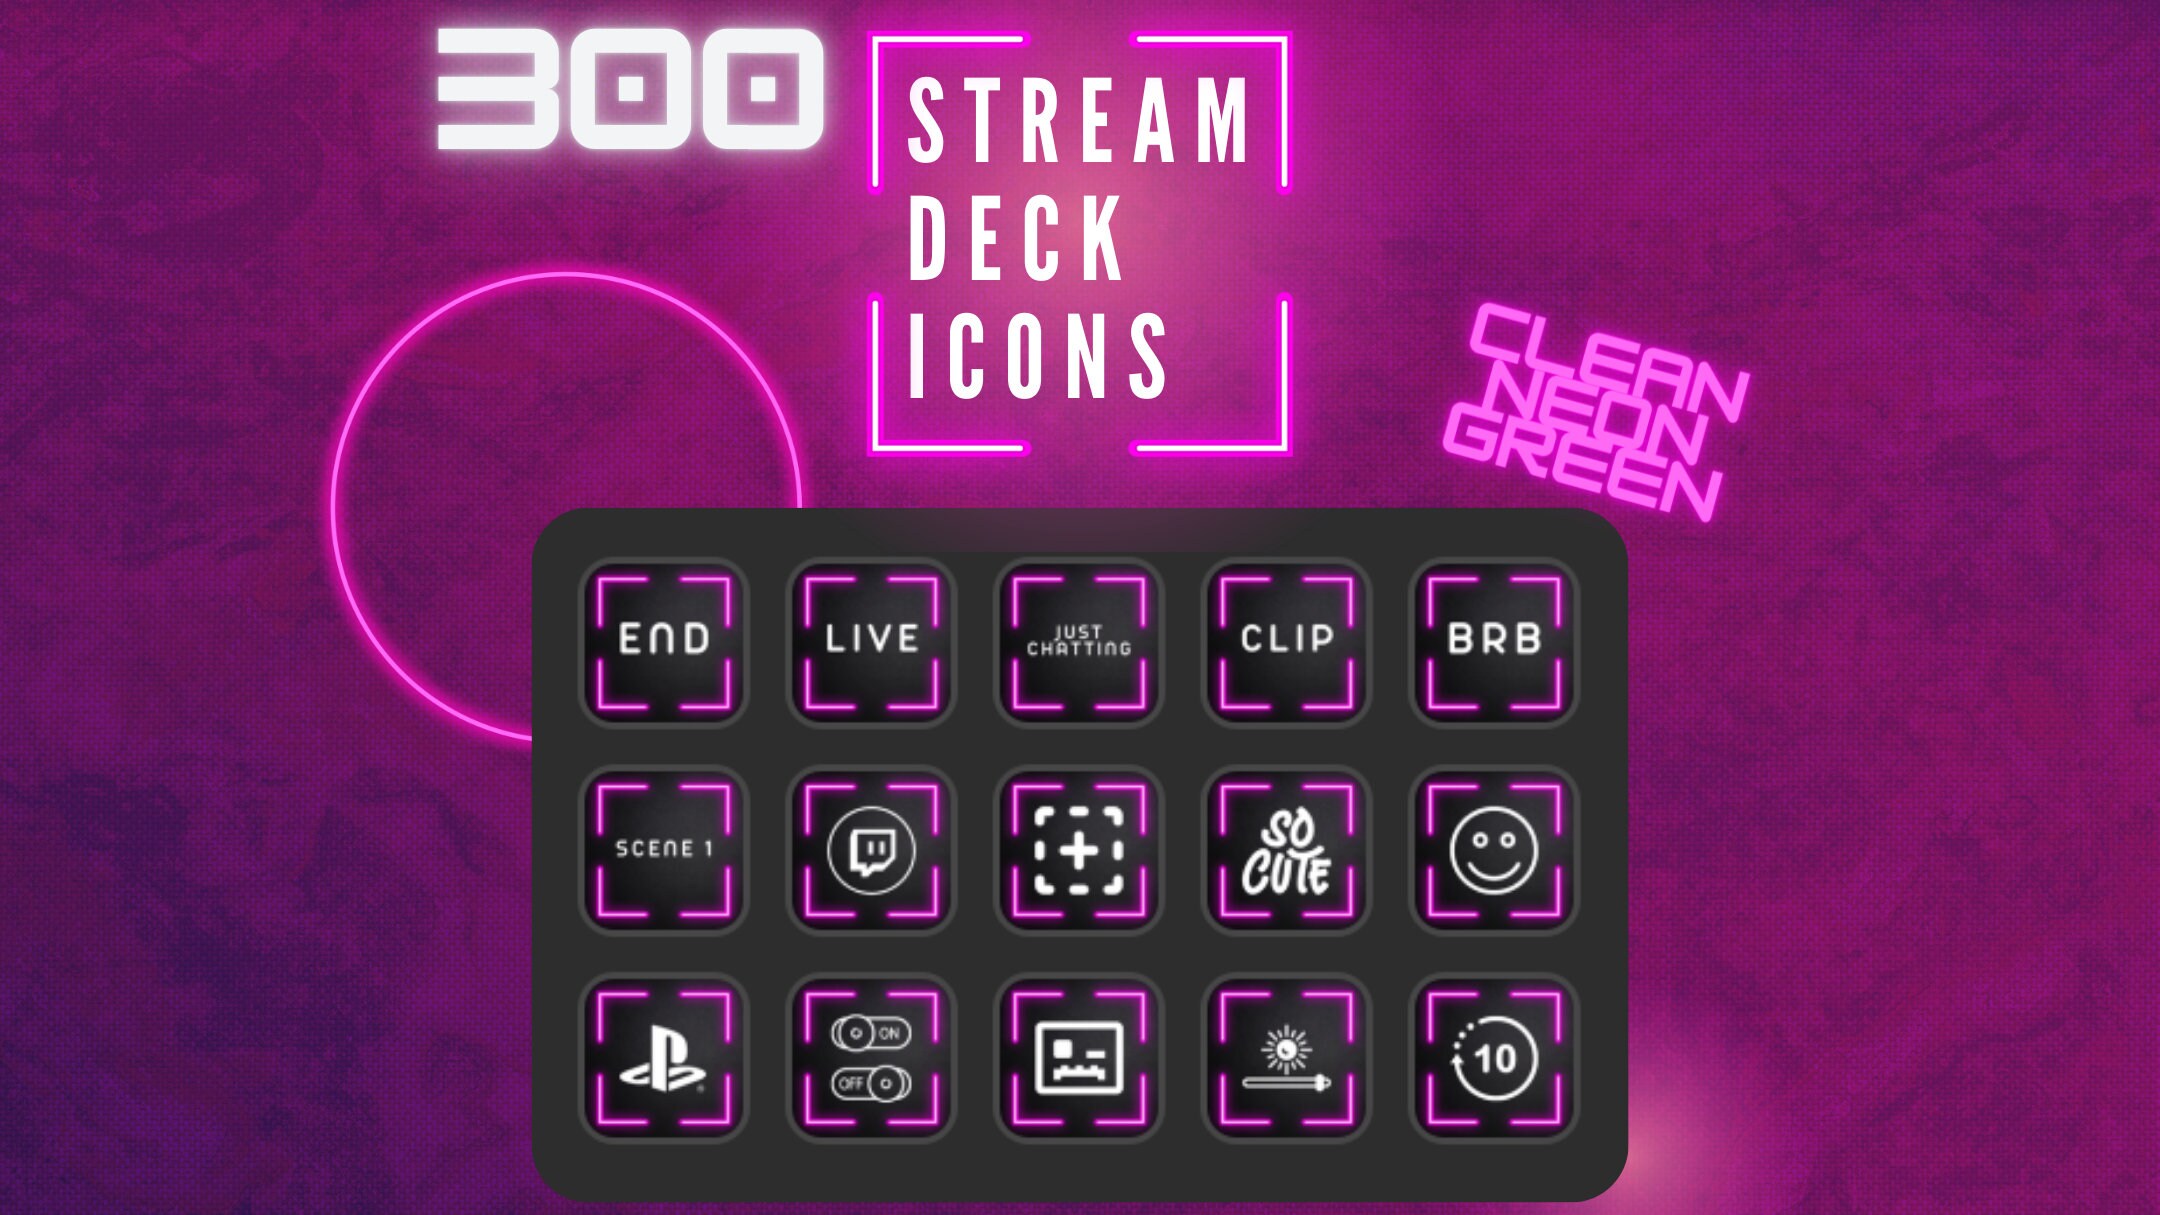 300 Stream Deck Icon Pack Clean Neon Pink - Etsy